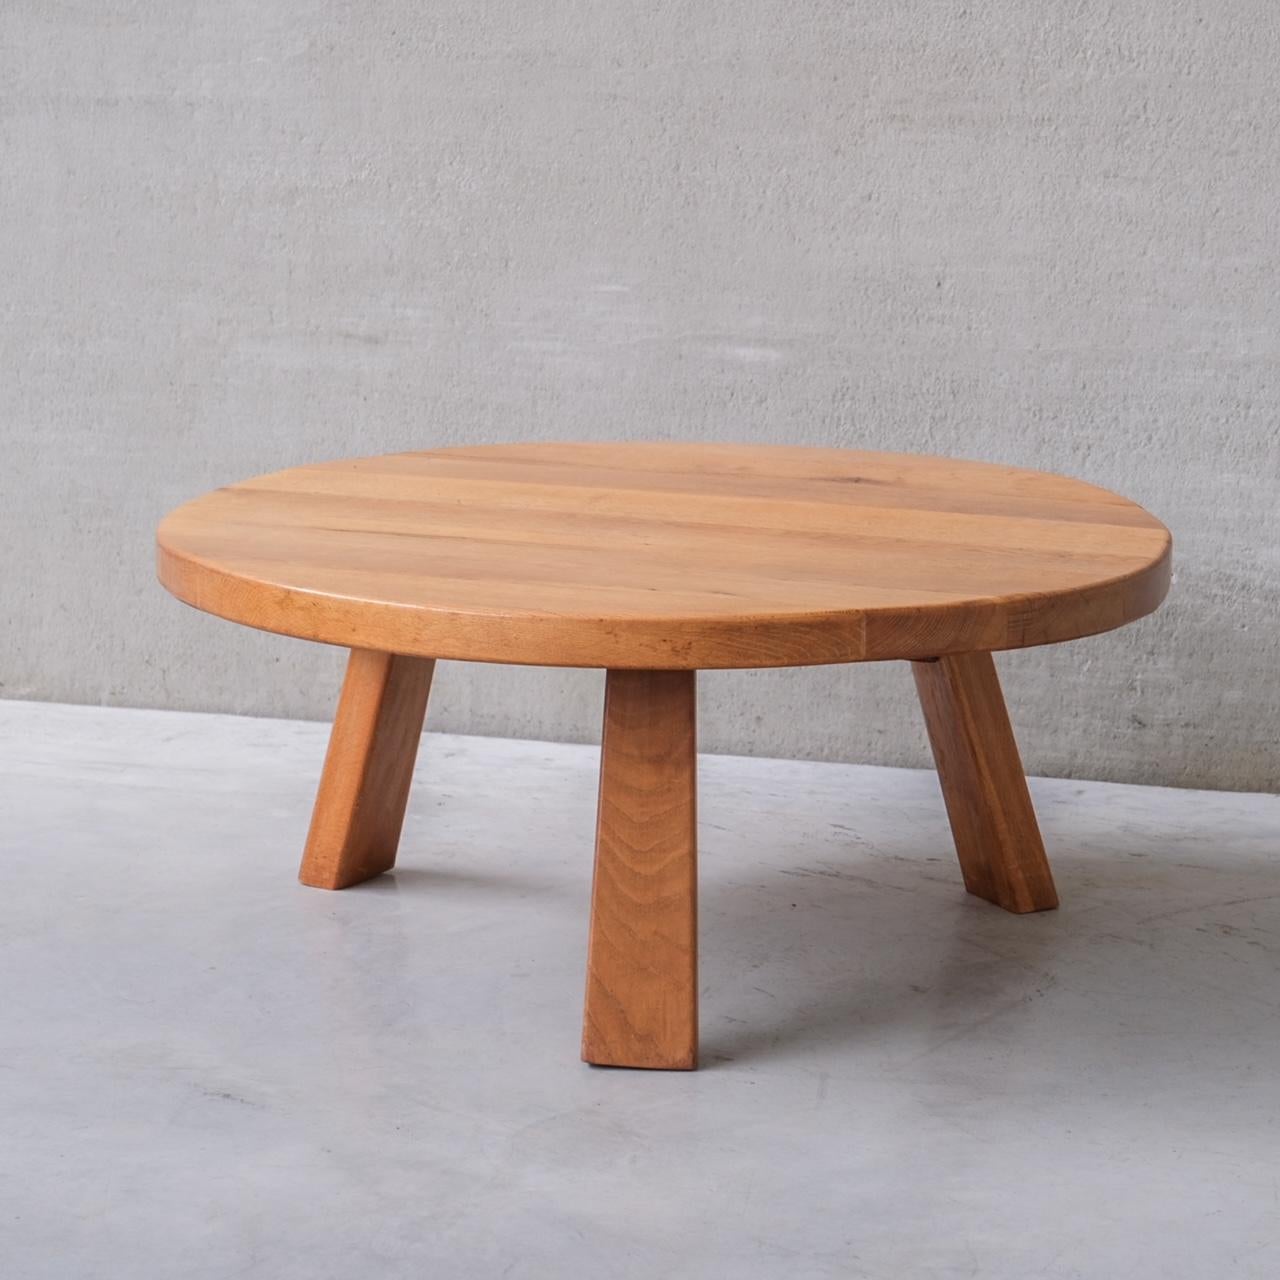 A blonde oak circular coffee table, 

Netherlands, circa 1970s. 

Raised over tripod legs. 

Good vintage condition, some scuffs and wear commensurate with age.

INTERNAL REF: 284/CT005 

Location: Belgium Gallery. 

Dimensions: 100